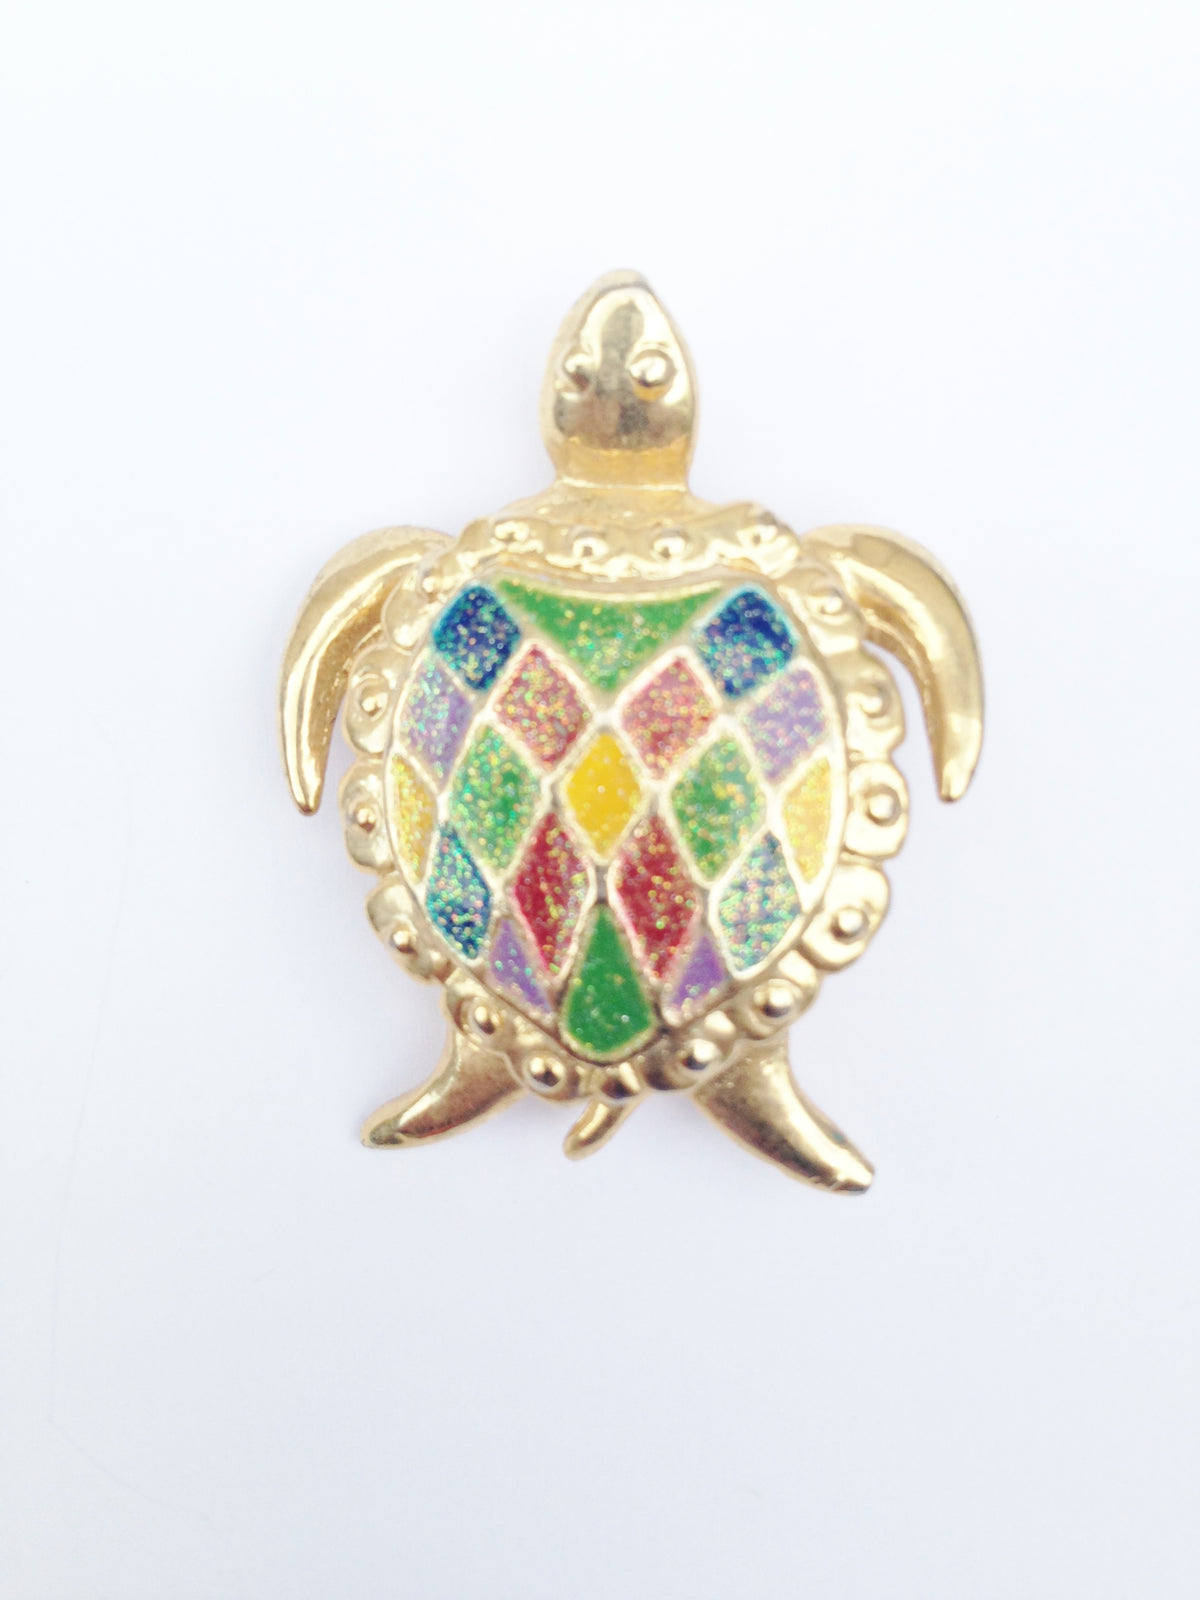 Gold Toned Multi Colored Shell Turtle Brooch Pin www.hersandhistreasures.com